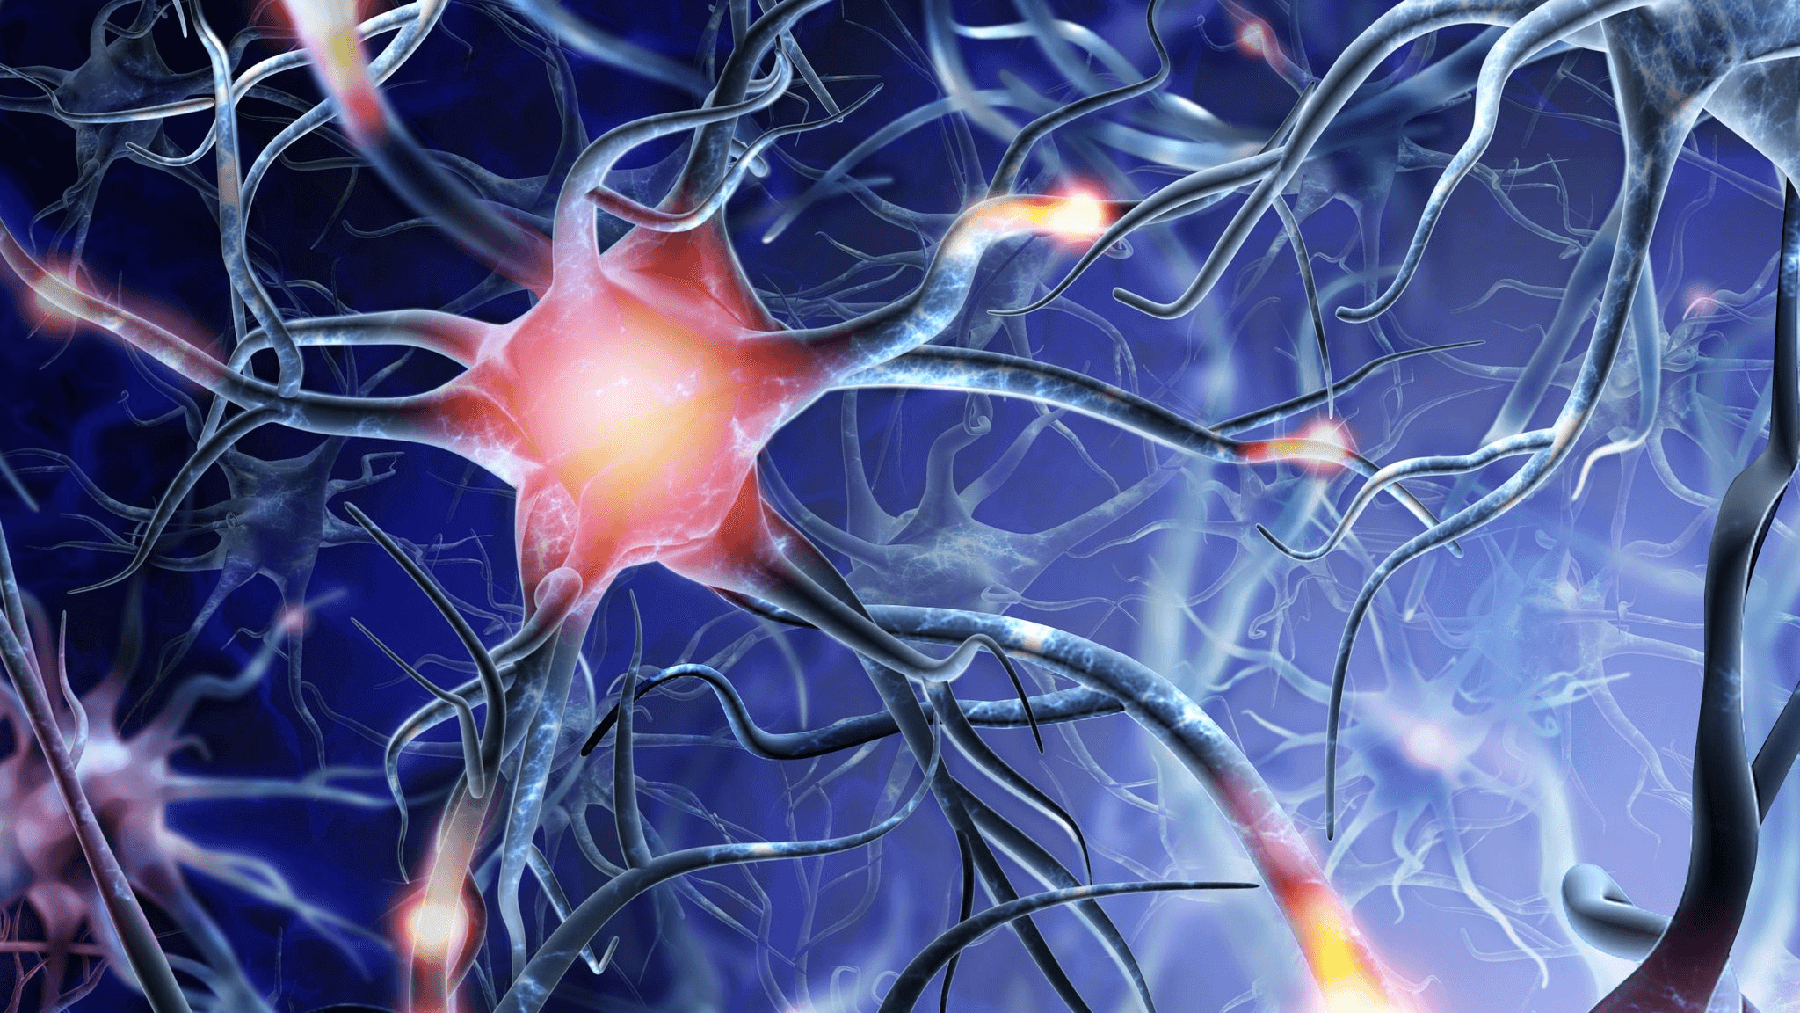 stock image of lit-up neuron